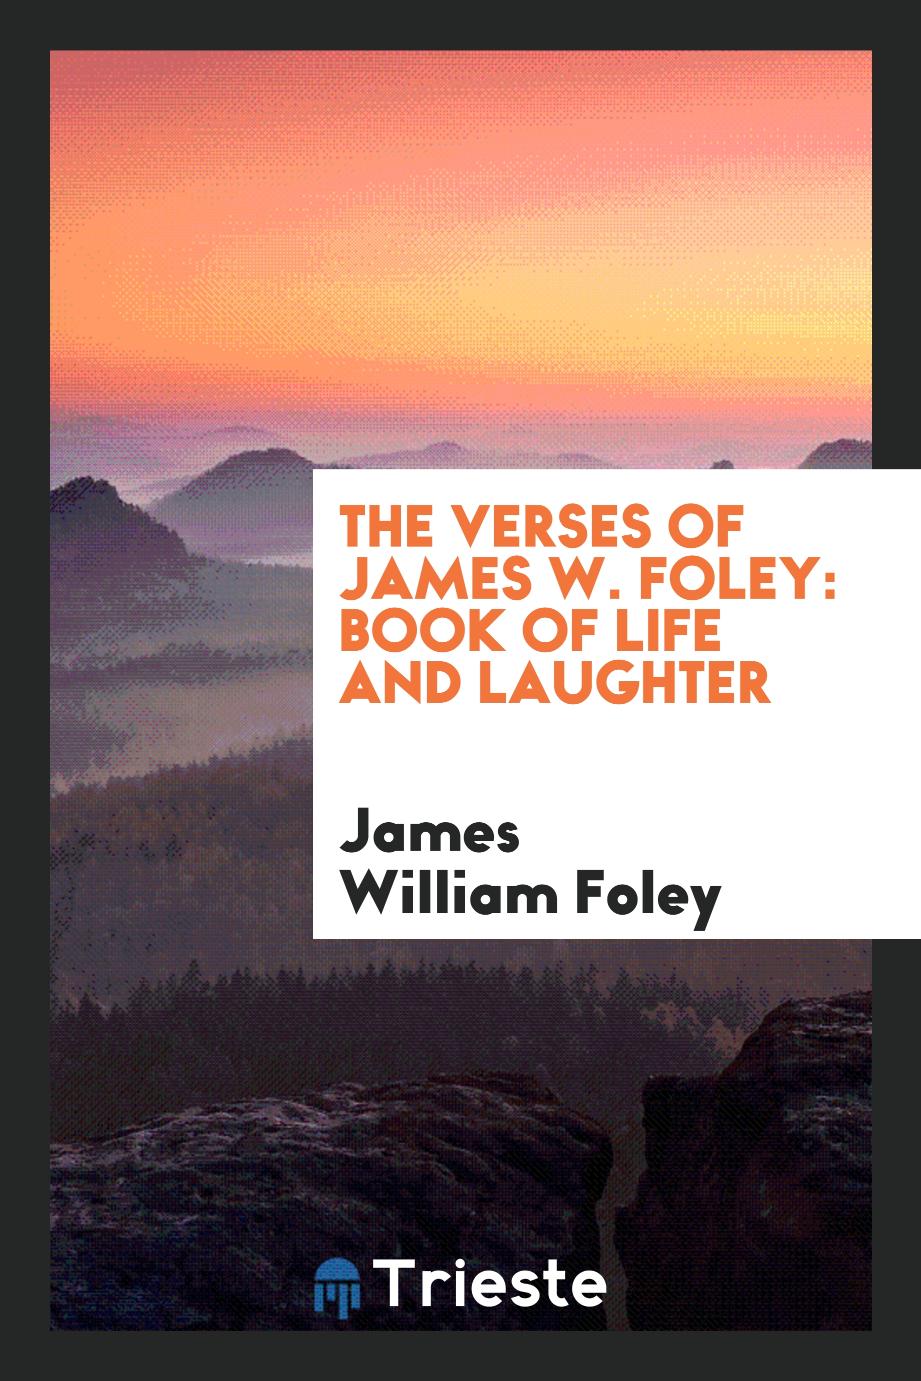 The verses of James W. Foley: book of life and laughter